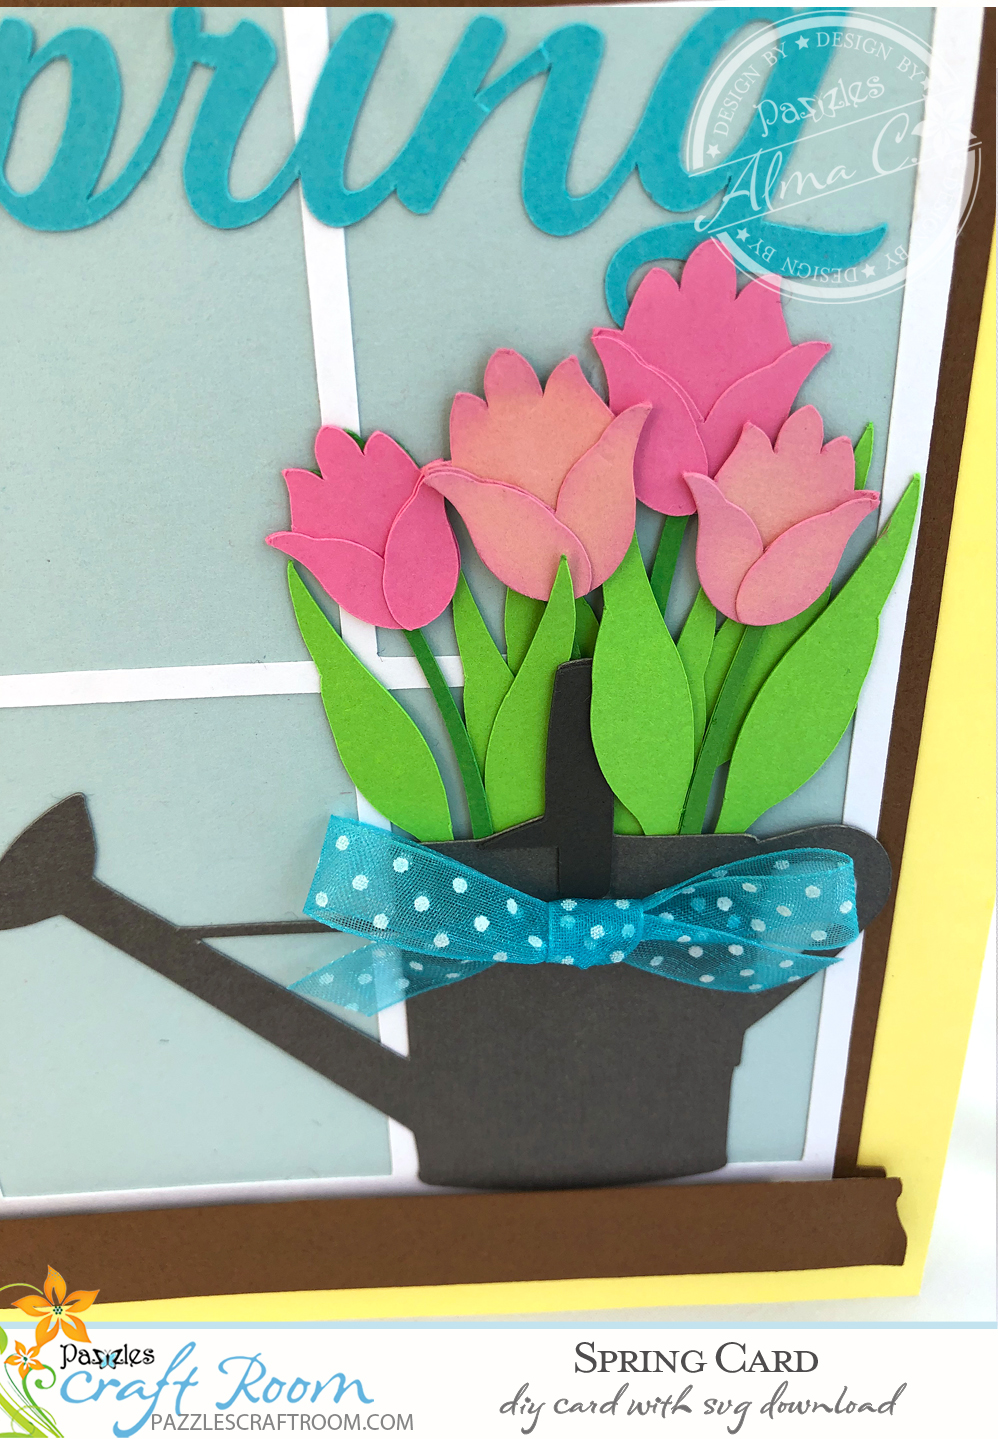 Pazzles DIY Spring Card with instant SVG download. Compatible with all major electronic cutters including Pazzles Inspiration, Cricut, and Silhouette Cameo. Design by Alma Cervantes.